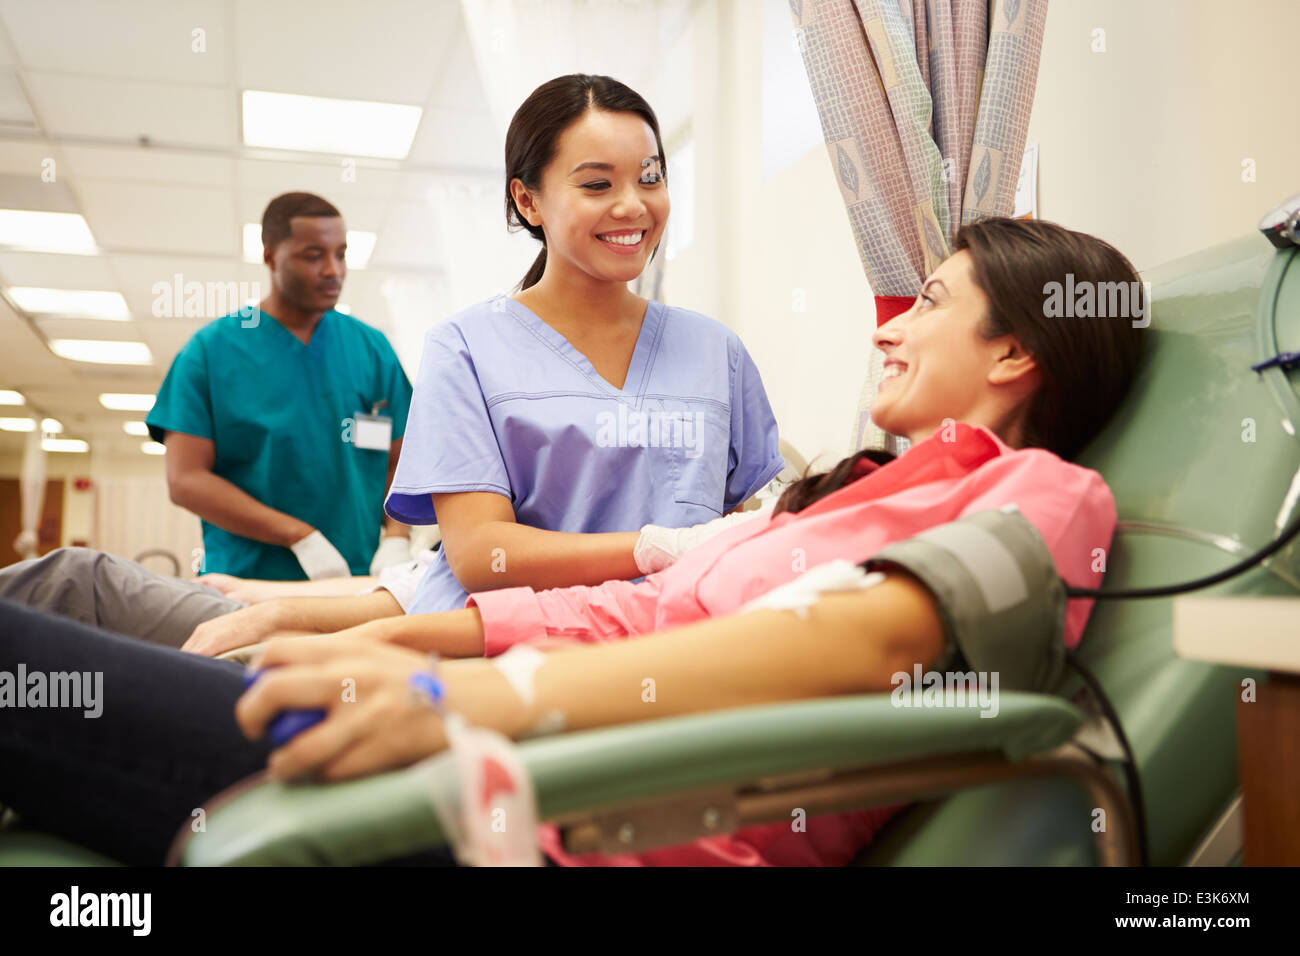 Blood Donors Making Donation In Hospital Stock Photo